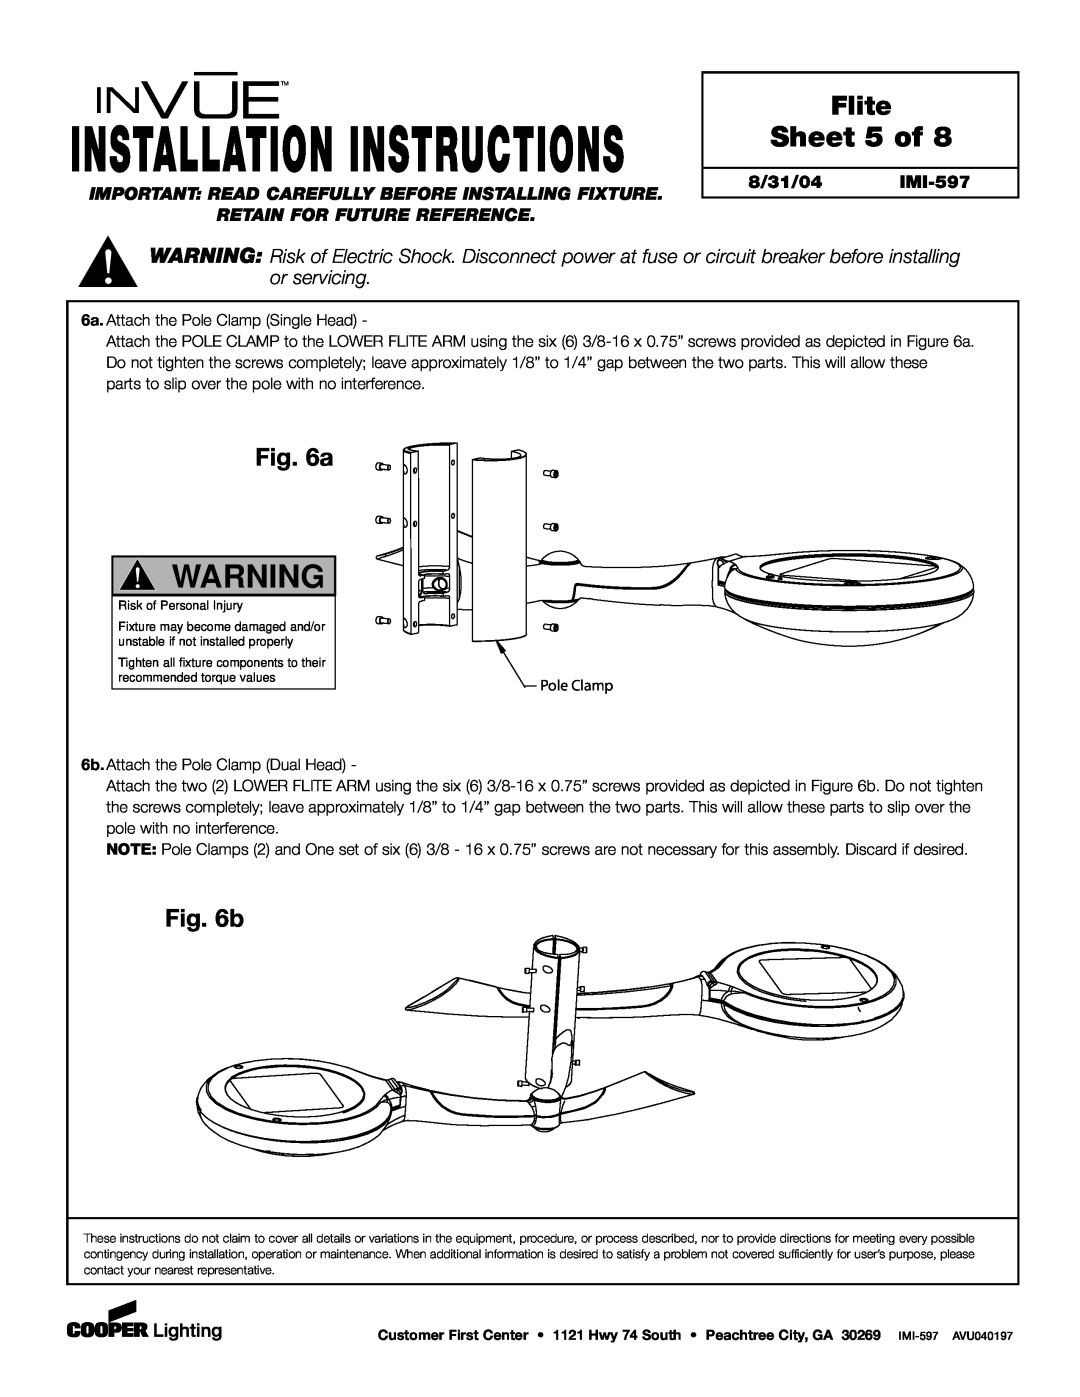 Cooper Lighting Sheet 5 of, b, Installation Instructions, Flite, Retain For Future Reference, 8/31/04 IMI-597 